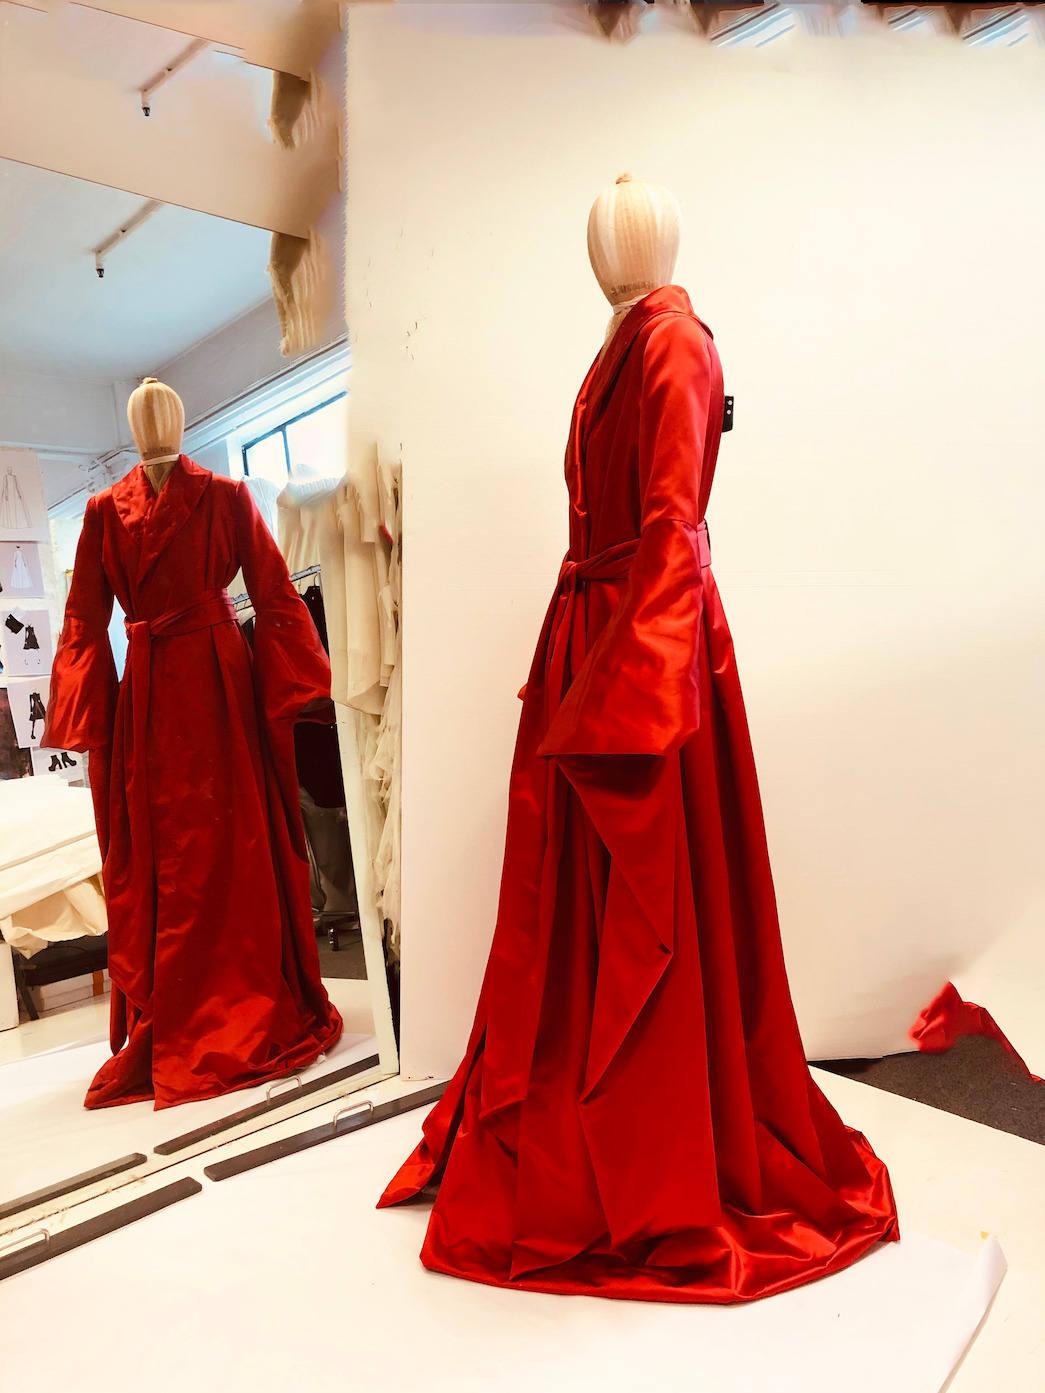 ‘The Sandman’: Gwendoline Christie’s Lucifer Costumes by Giles Deacon ...